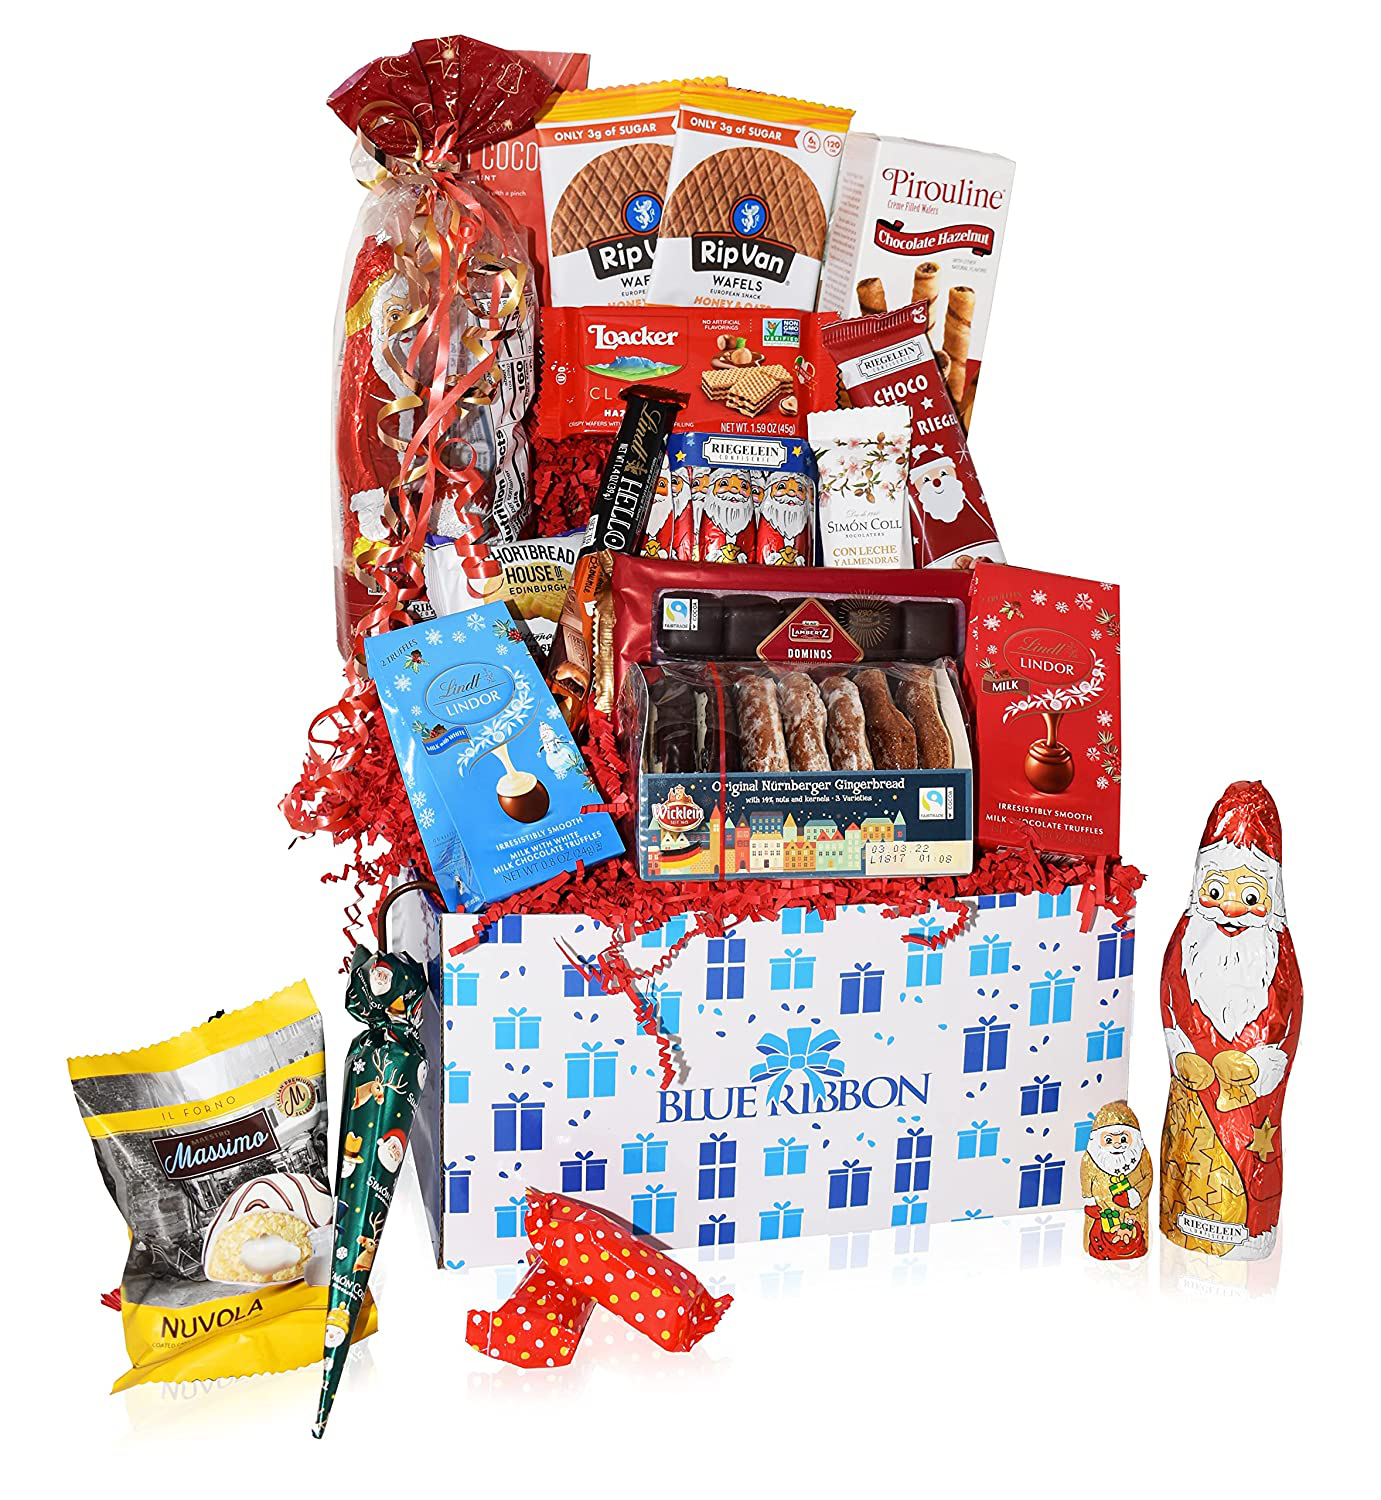 Christmas Chocolate & Snacks Box Variety Gift Care Package Basket – Truffles, Cookies, Santa, Cady Pack for Office, Girl, Schools, Friends & Family, Military, College, Son, Daughter, Men, Women, Kids